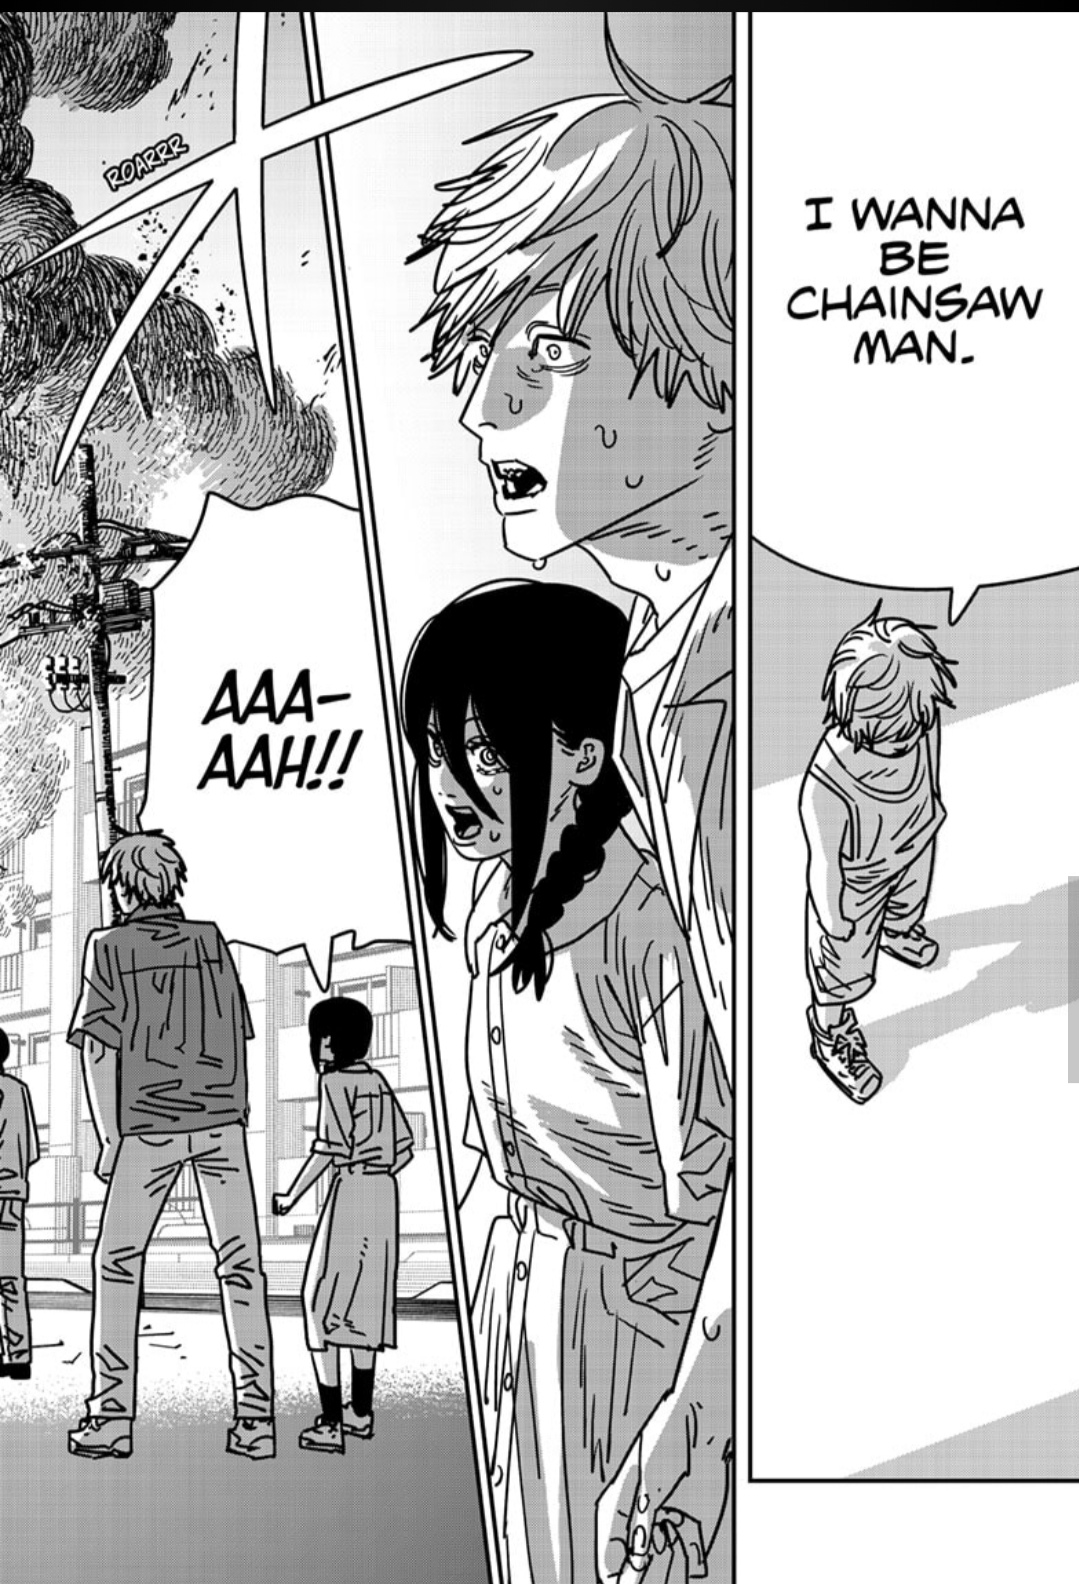 Chainsaw Man chapter 150: Release date and time, countdown, what to expect,  and more